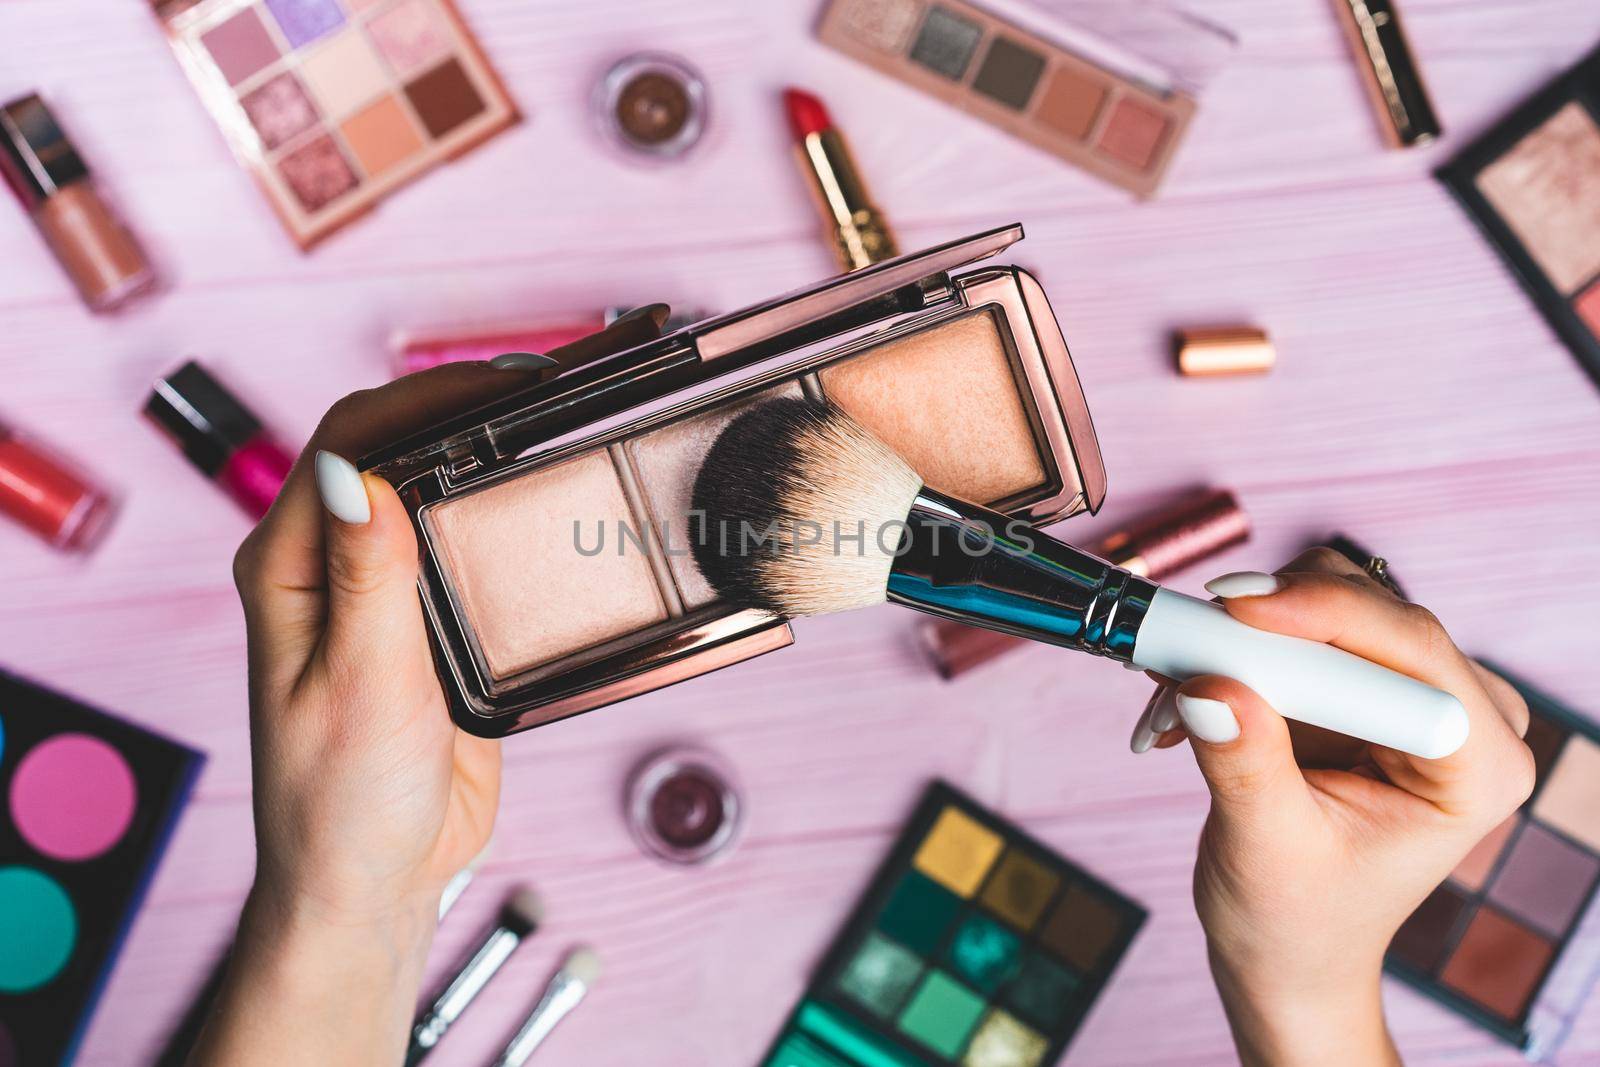 Woman working with face contouring palette - powder, bronzer and highlighter on pink flat lay cosmetics collection background. Tools in beauty industry - lipsticks, eyeshadows, glosses.High quality